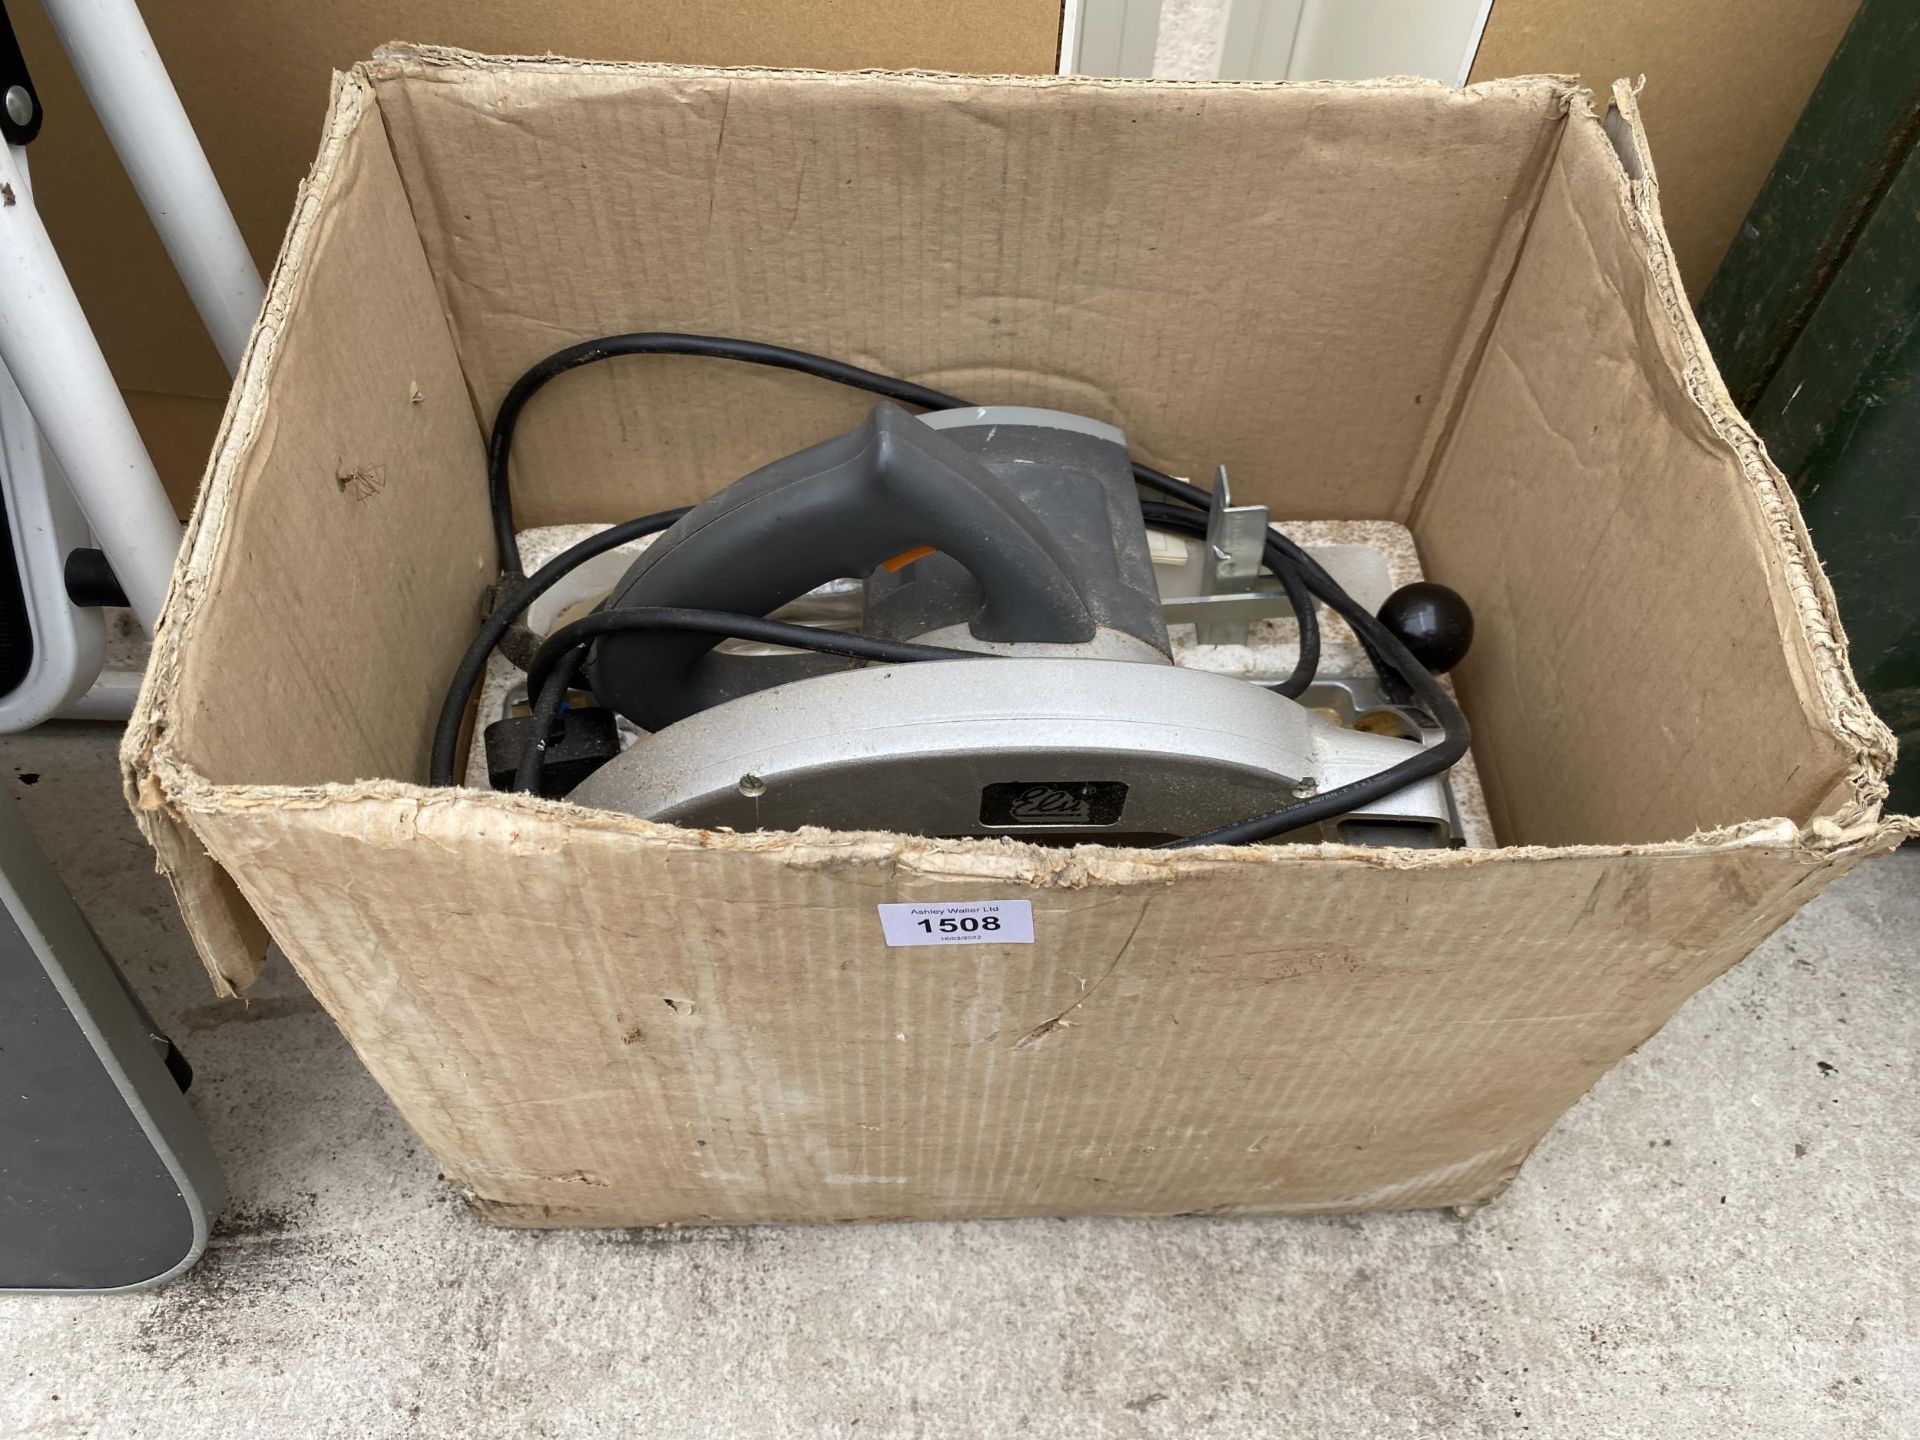 A LARGE CIRCULAR SAW BELIEVED IN WORKING ORDER BUT NO WARRANTY